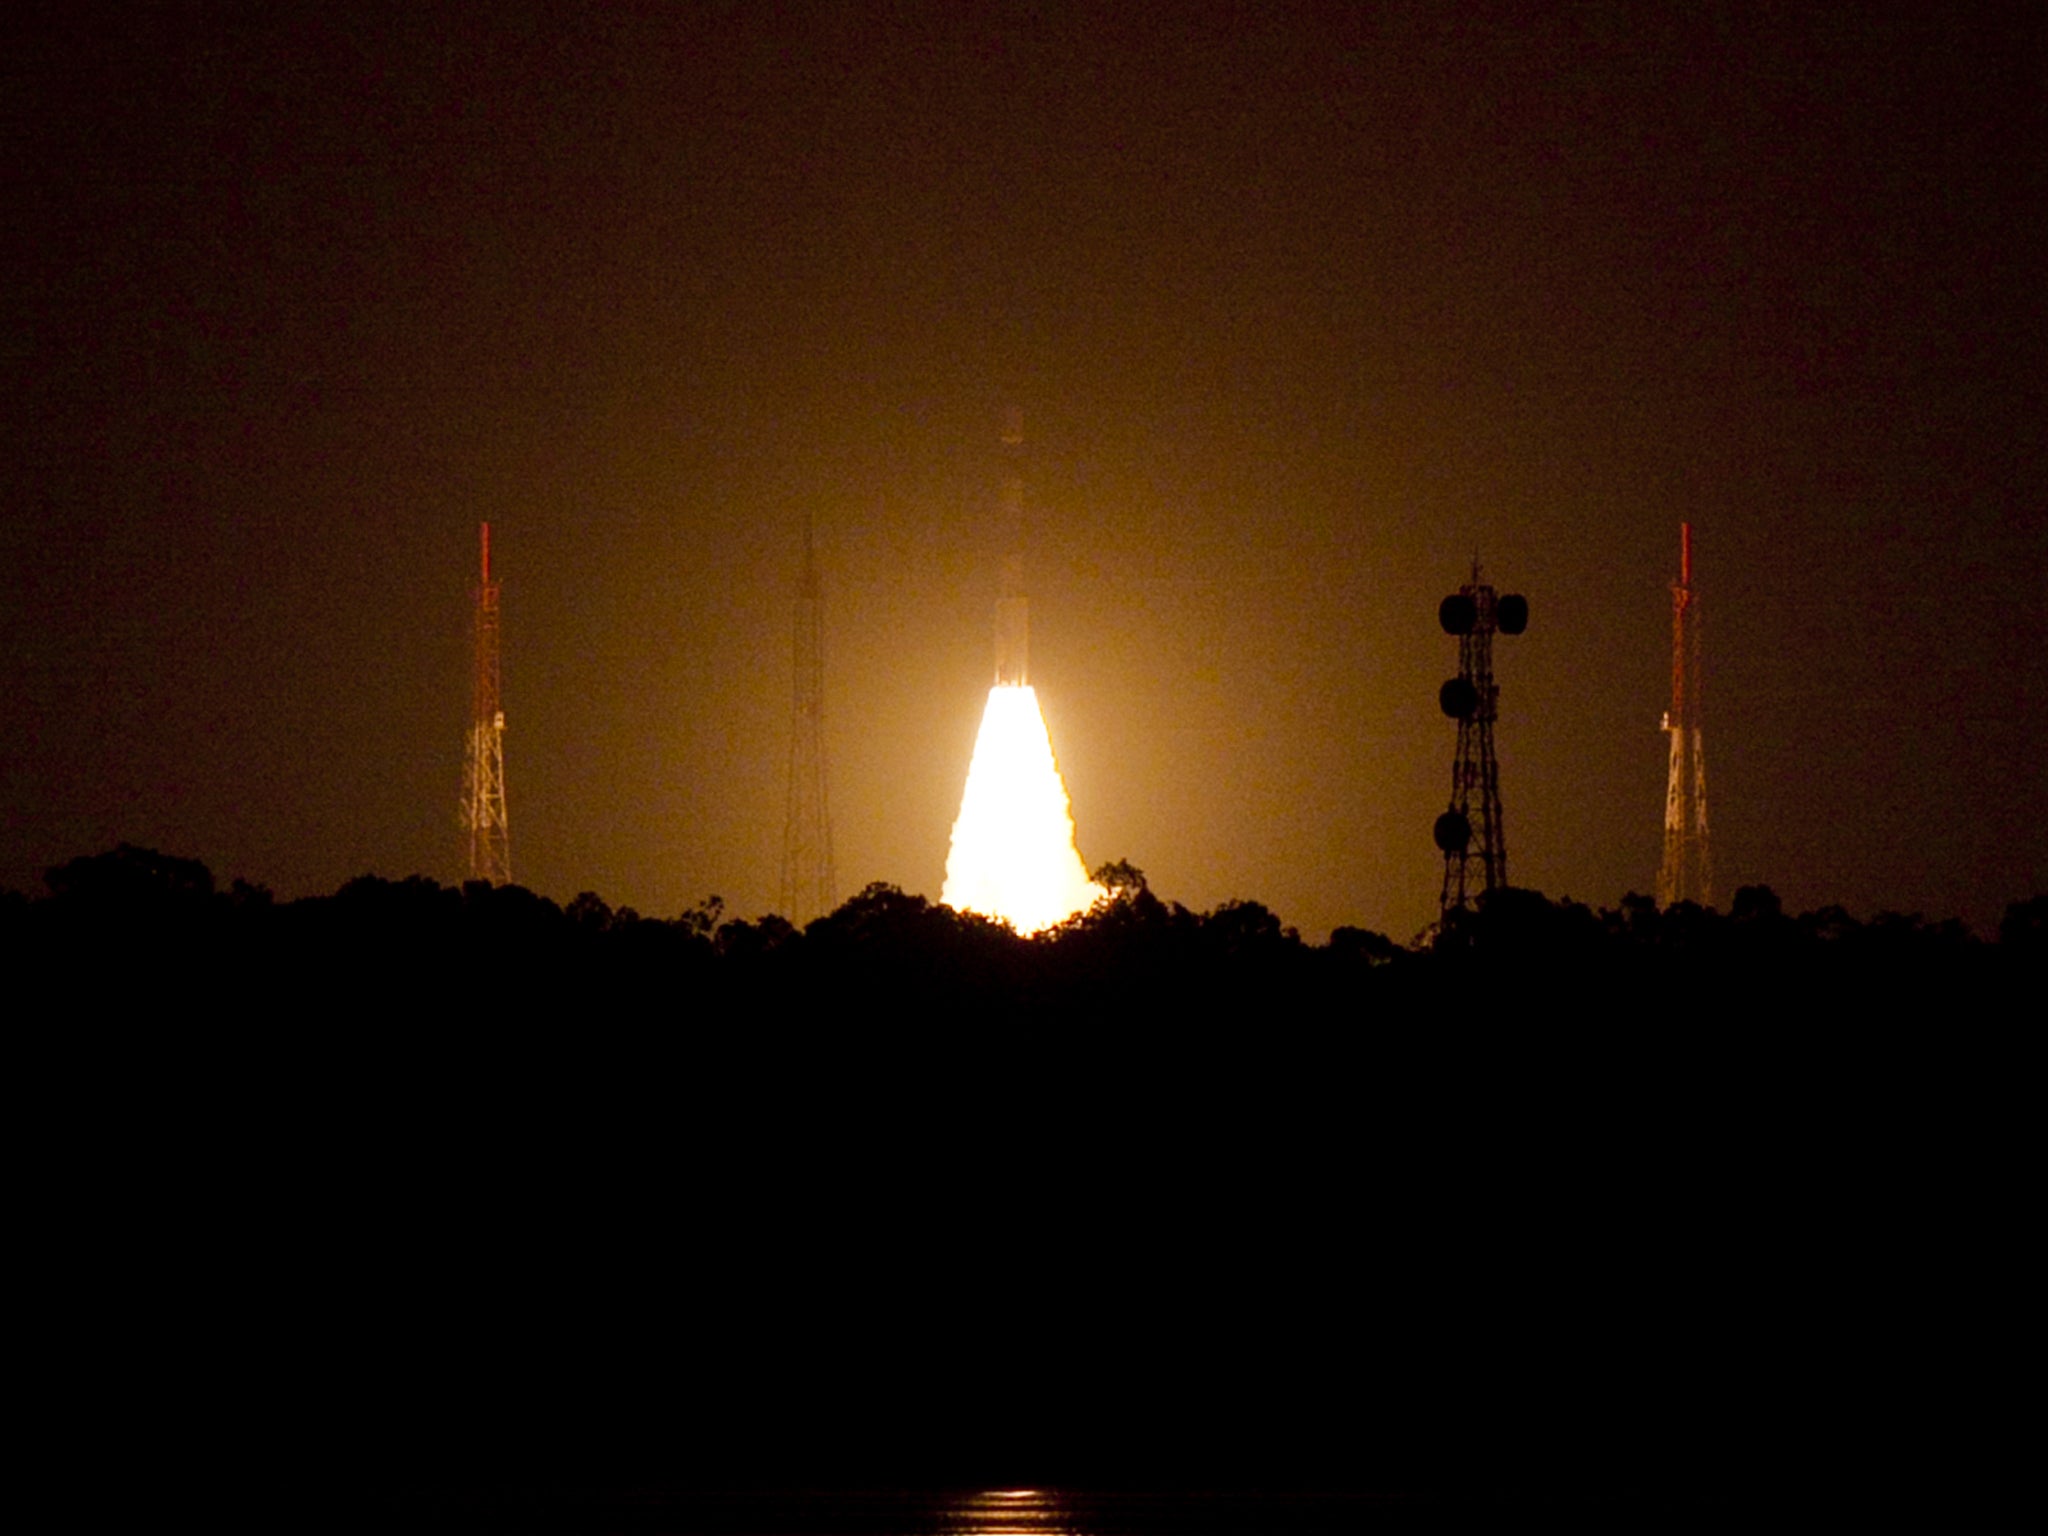 India's Polar Satellite Launch Vehicle (PSLV-C22) is launched from The Satish Dhavan Space Centre Sriharikota. India, the world's fourth largest economy and the biggest recipient of non-humanitarian aid from Britain already has 60 satellites in space